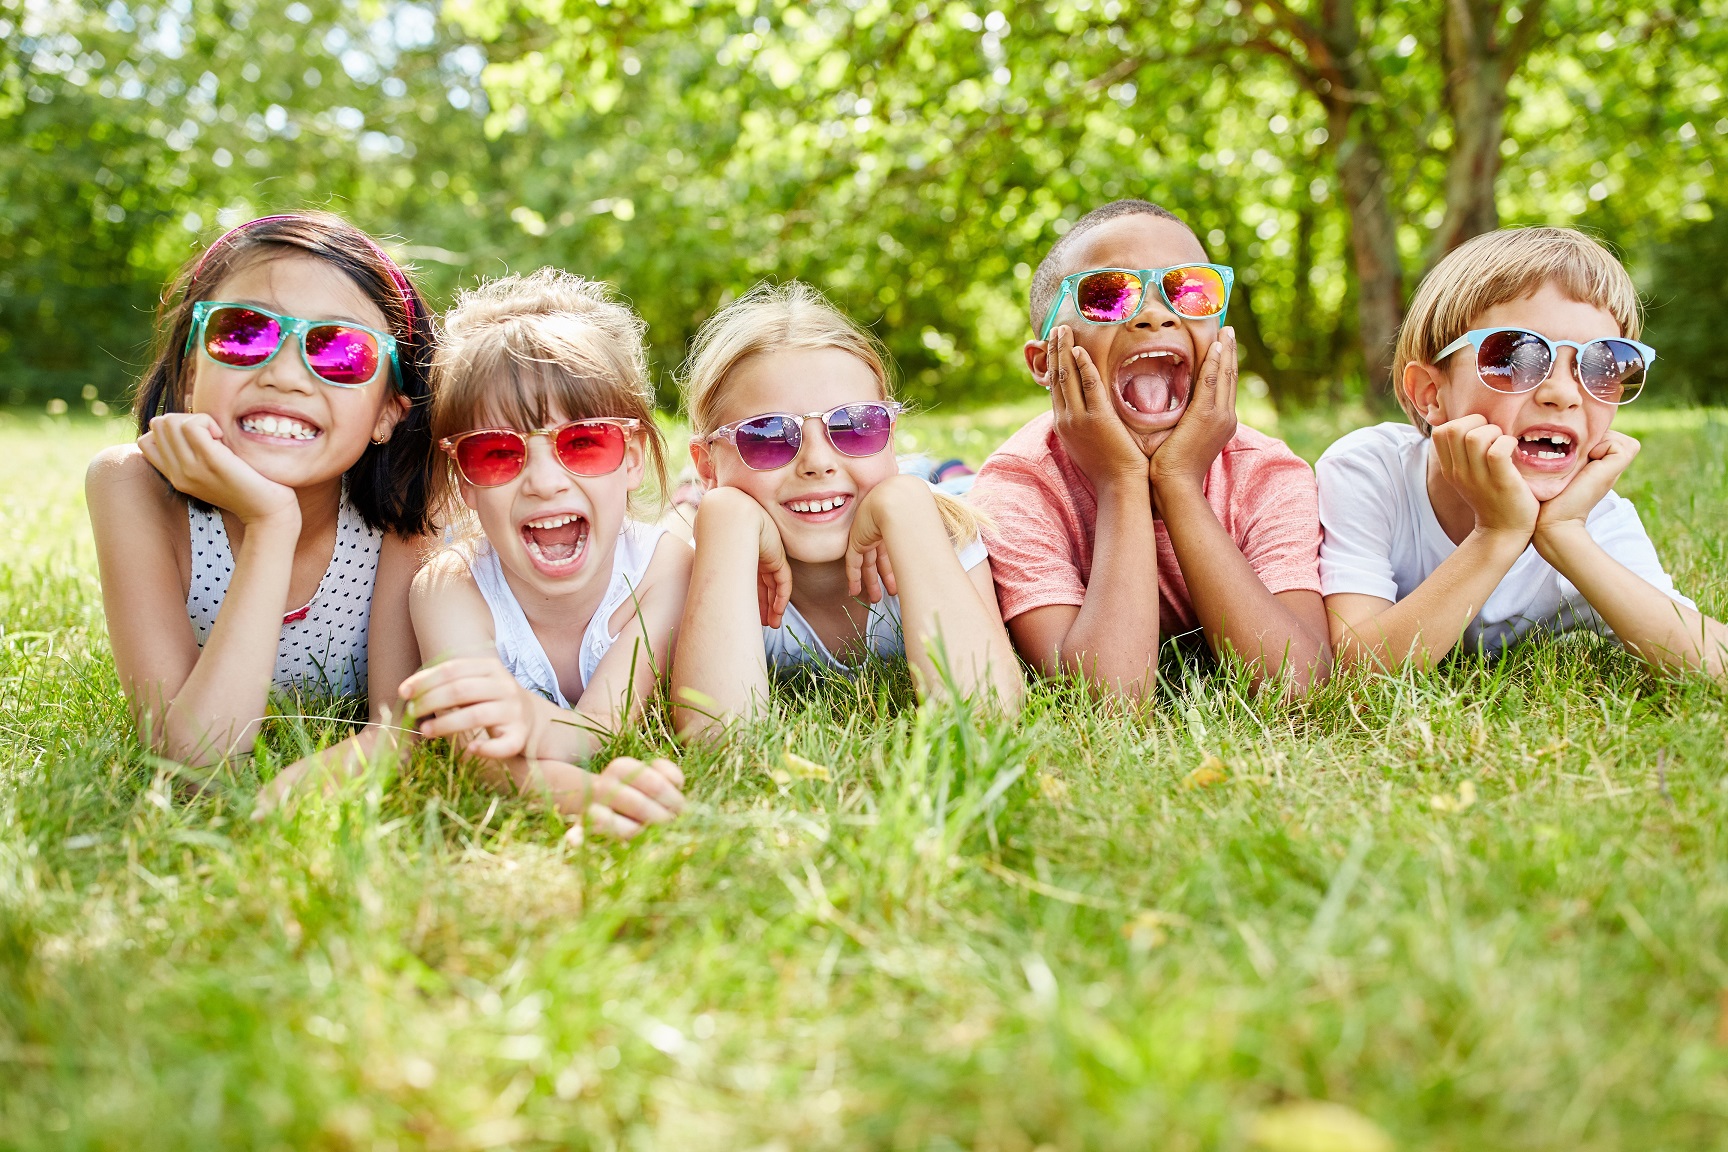 Five smiling boys and girls crouched on the ground with their hands under their chins, wearing colorful sunglasses